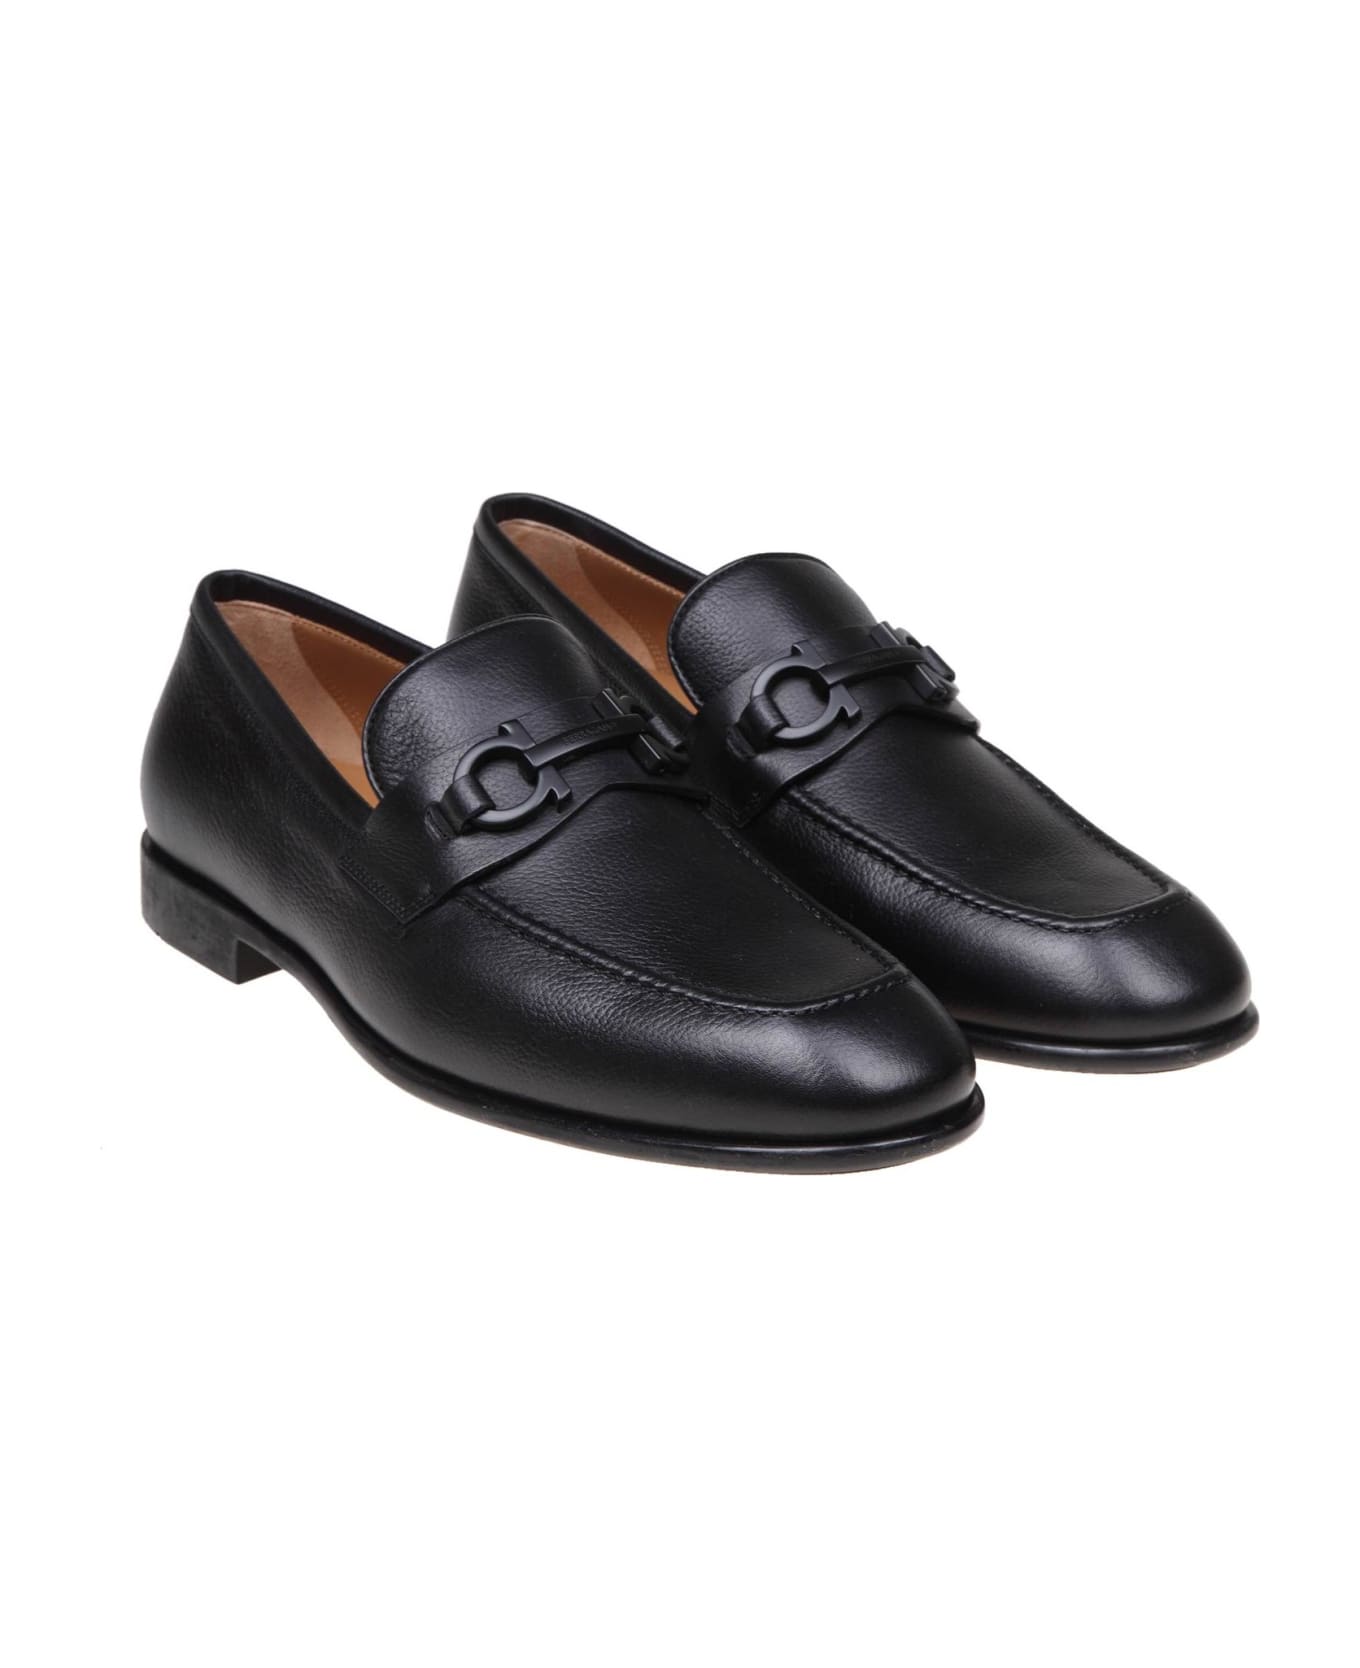 Ferragamo Leather Loafers With Gancini Buckle - Black ローファー＆デッキシューズ